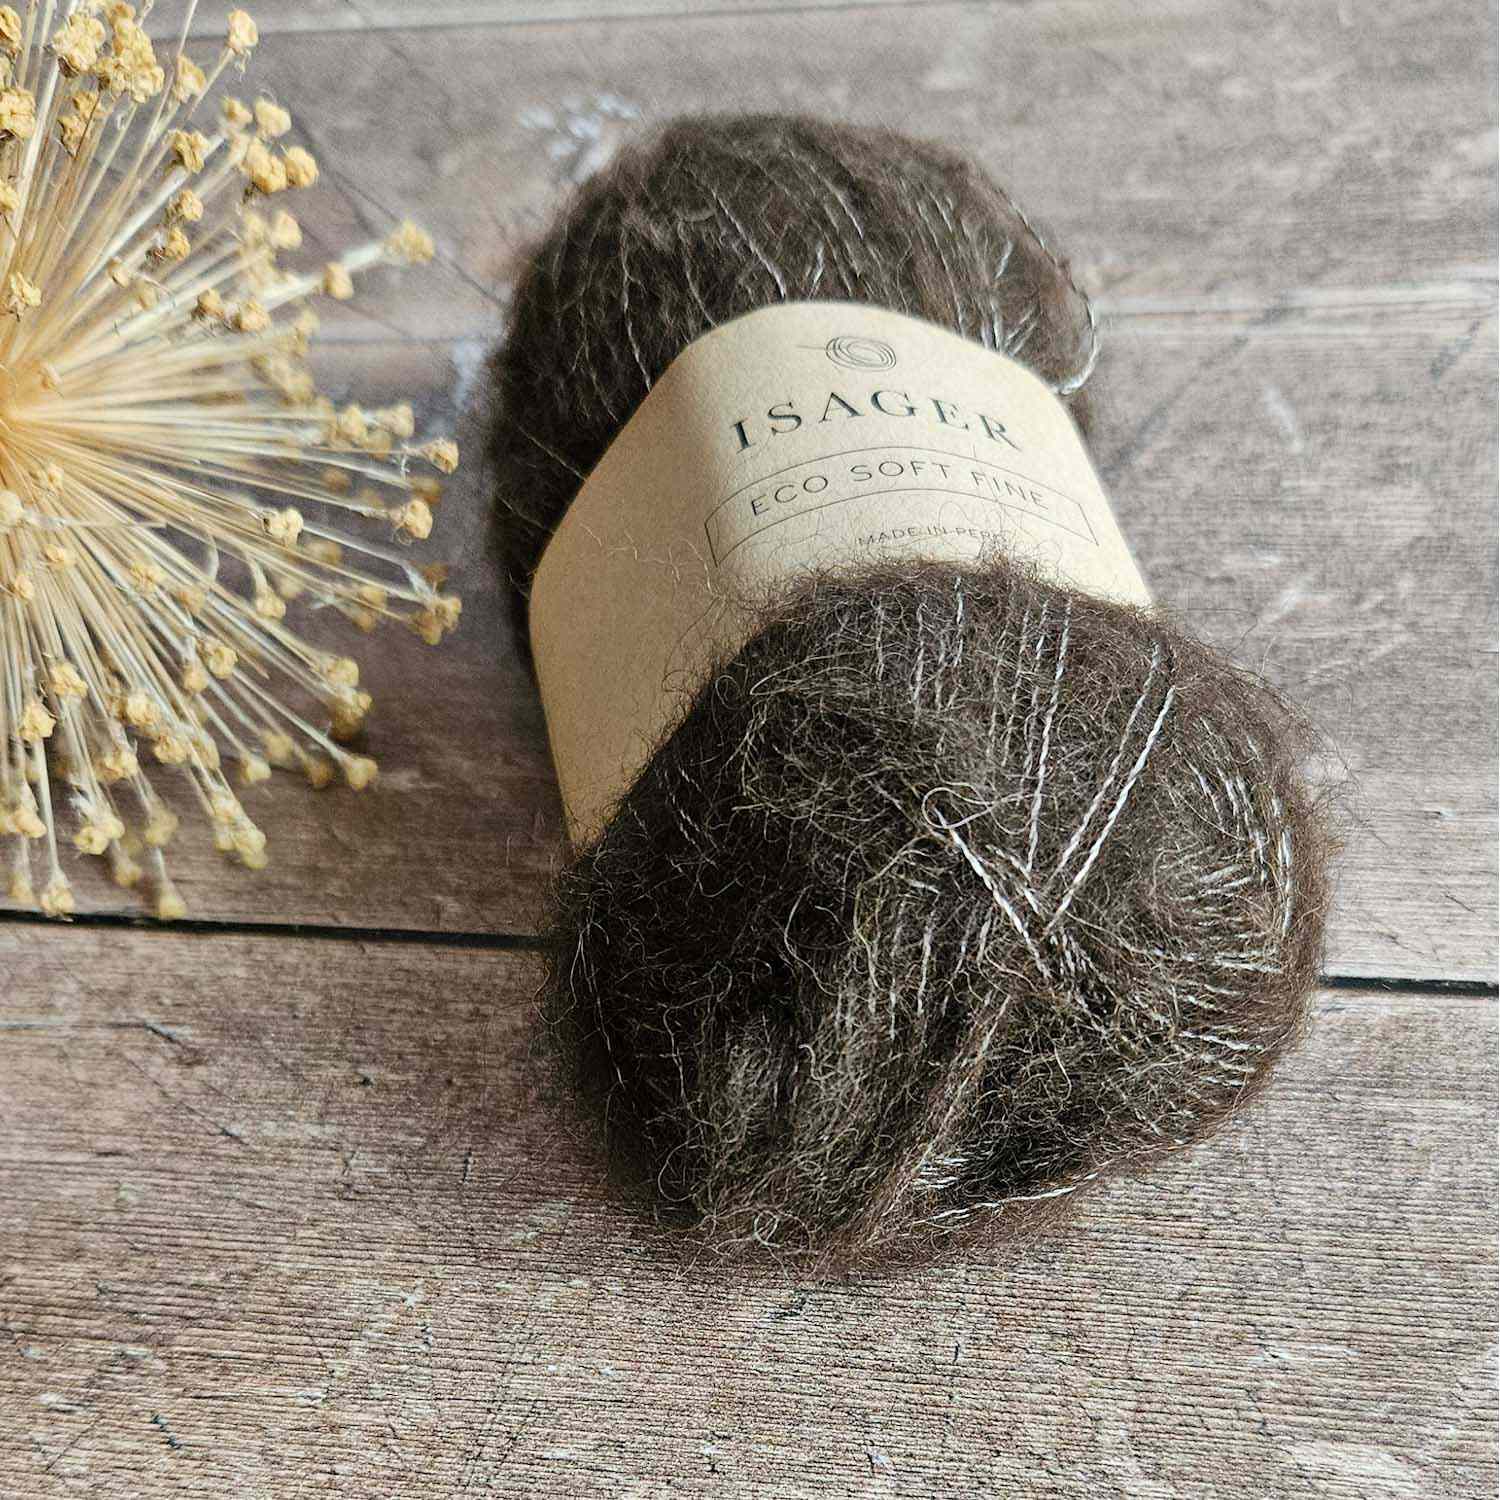 Isager Soft Fine yarn - E8S